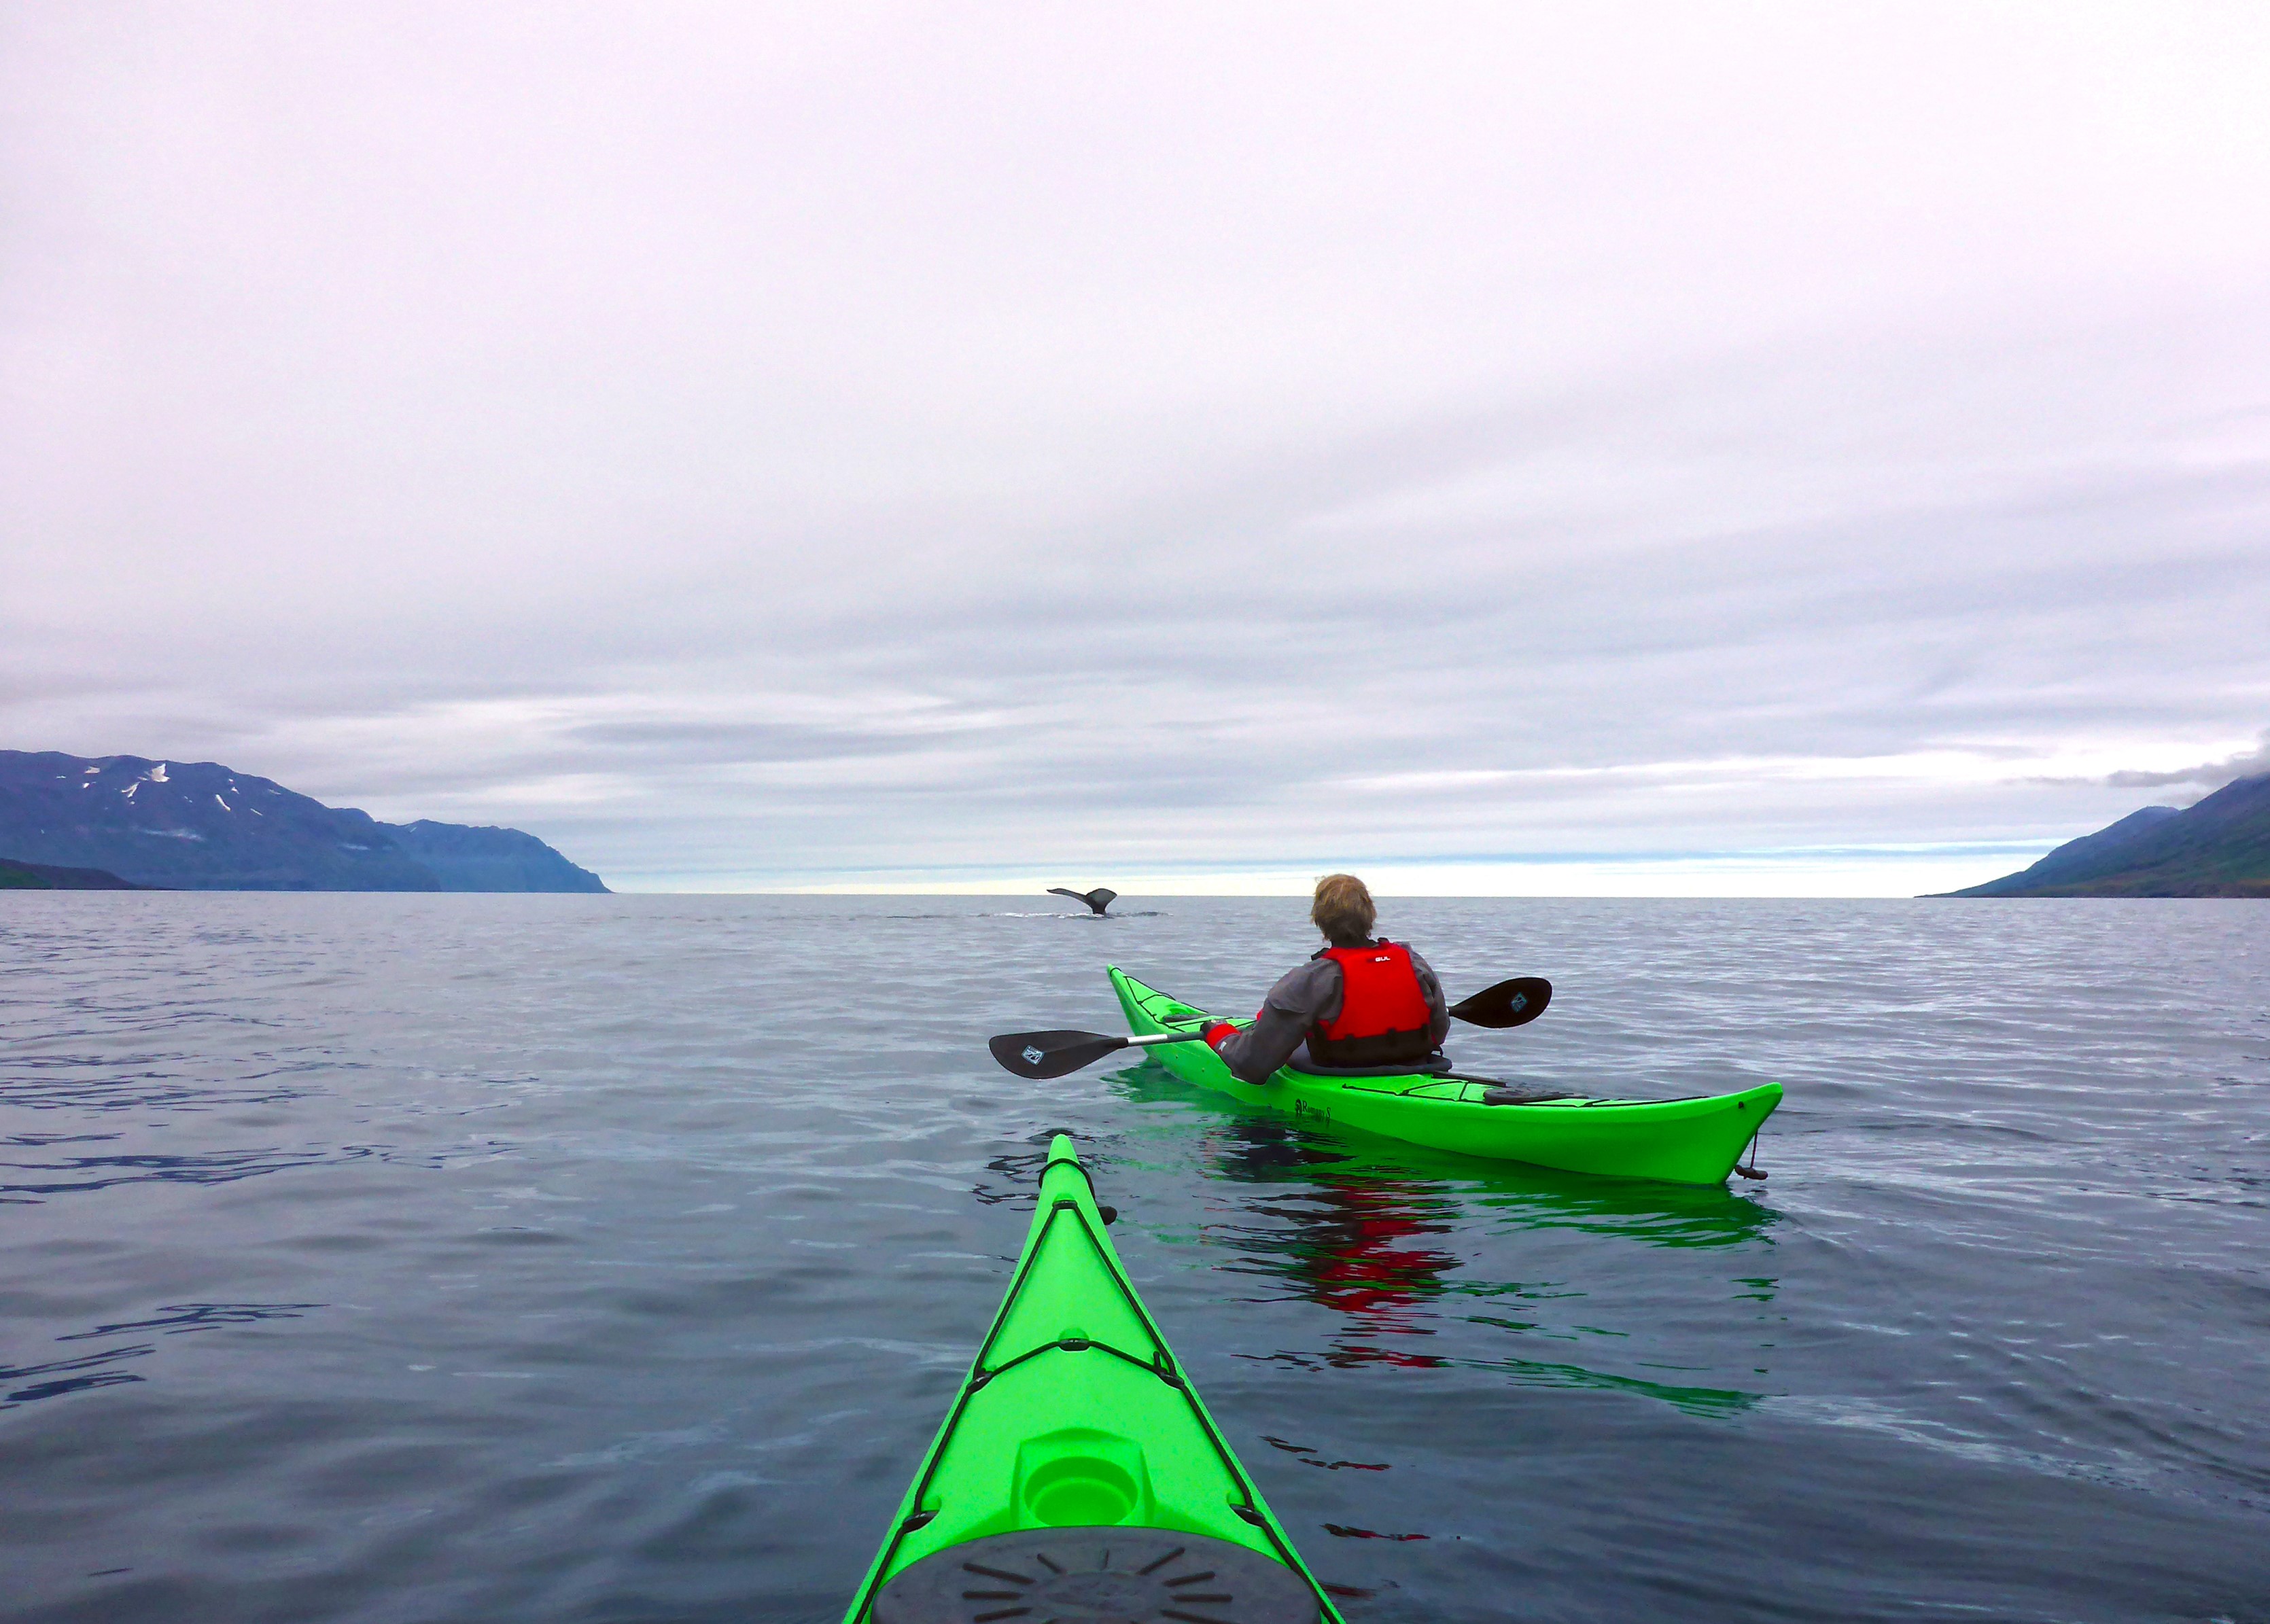 Image of two kayakers in open water observing a whale fluke in the distance